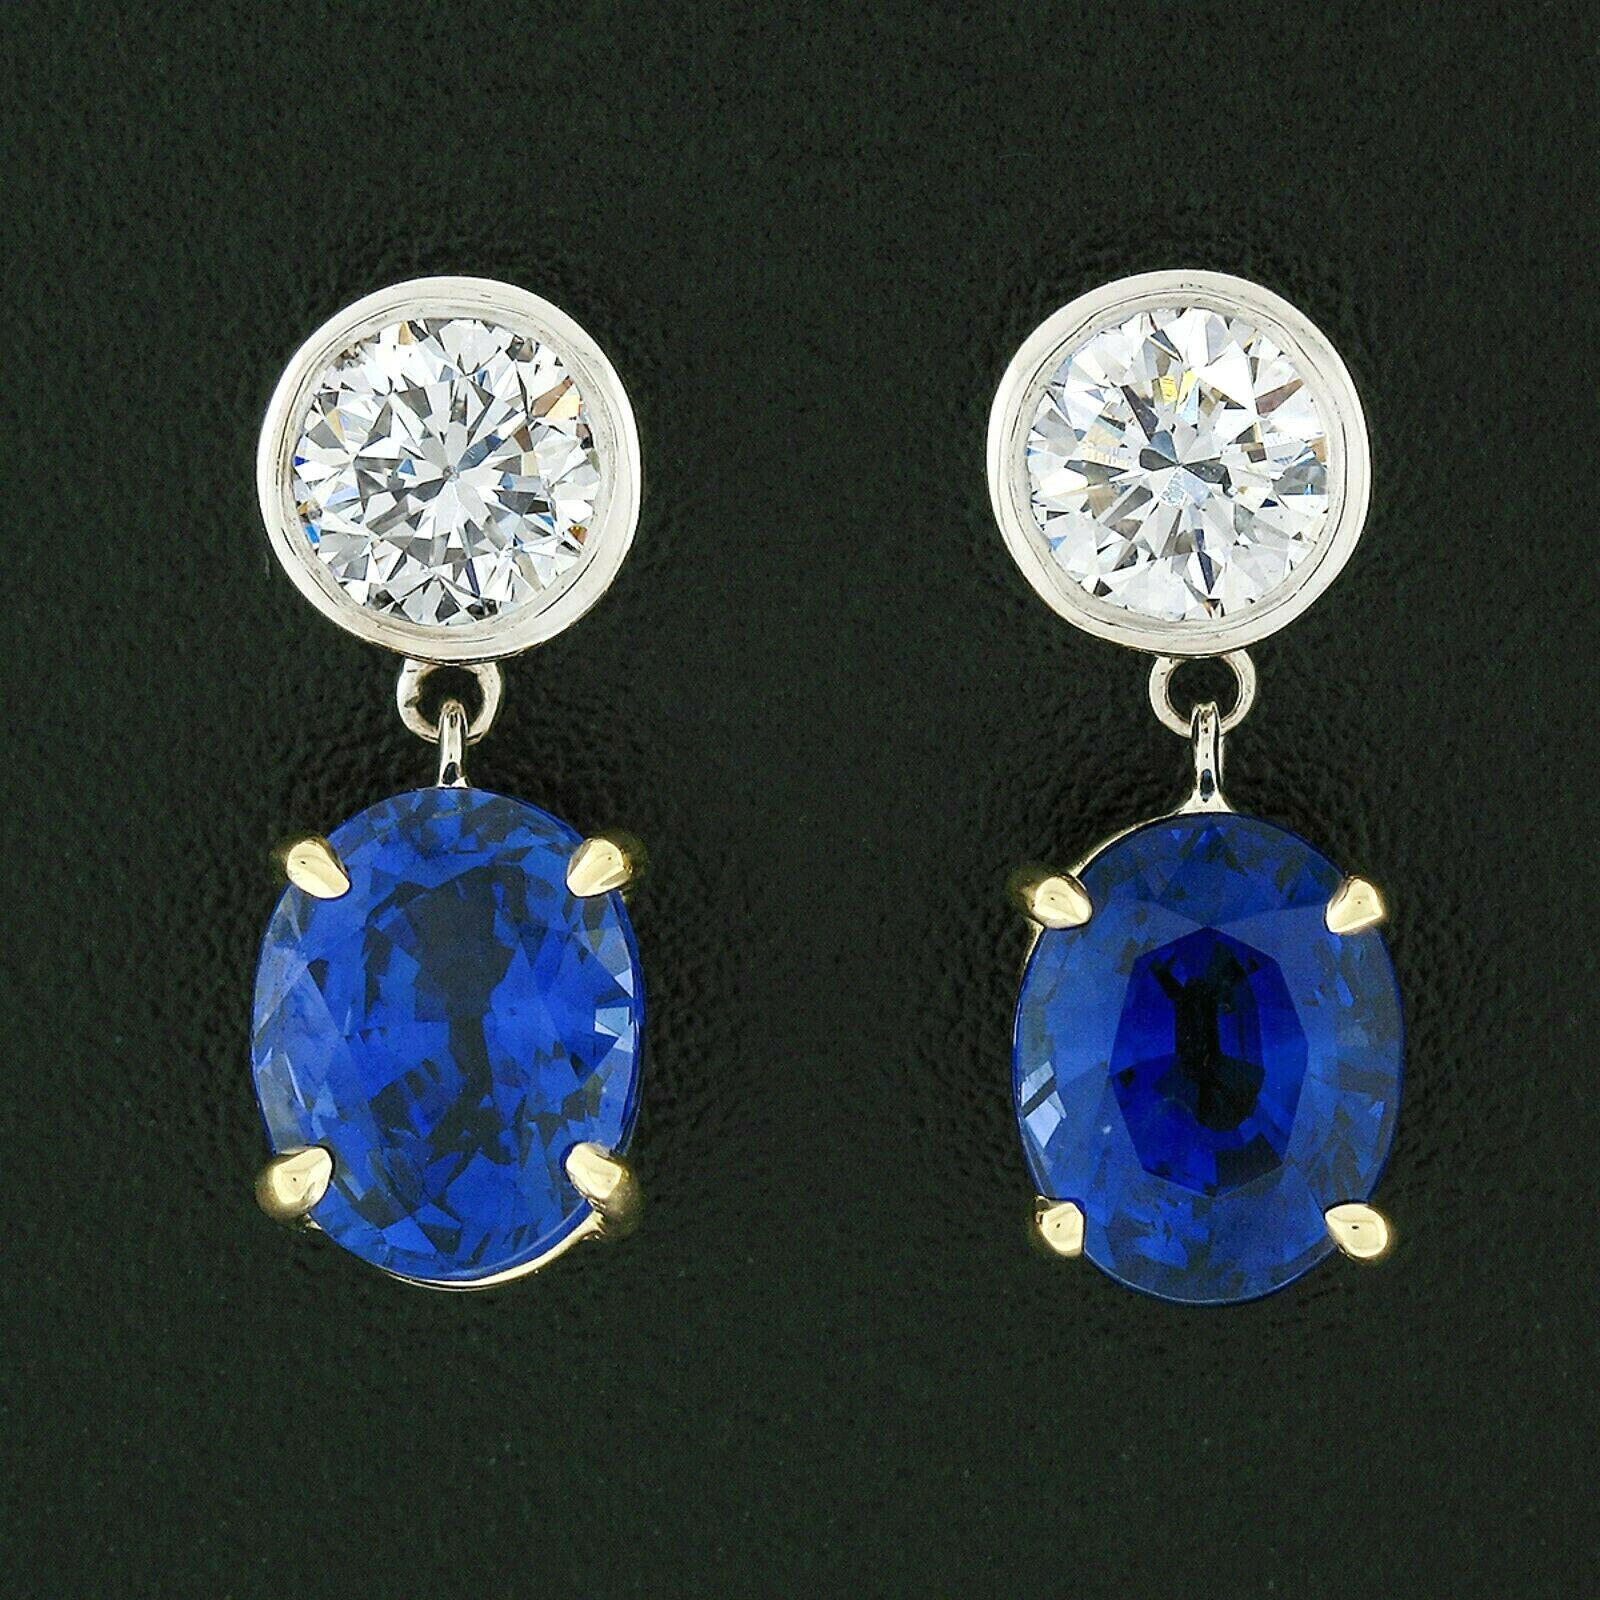 These magnificent, brand new, custom made earrings were crafted in solid 18k gold and feature a matching pair of GIA certified oval brilliant cut blue sapphires prong set in sturdy yellow gold baskets. The sapphire stones are a breathtaking, SUPER